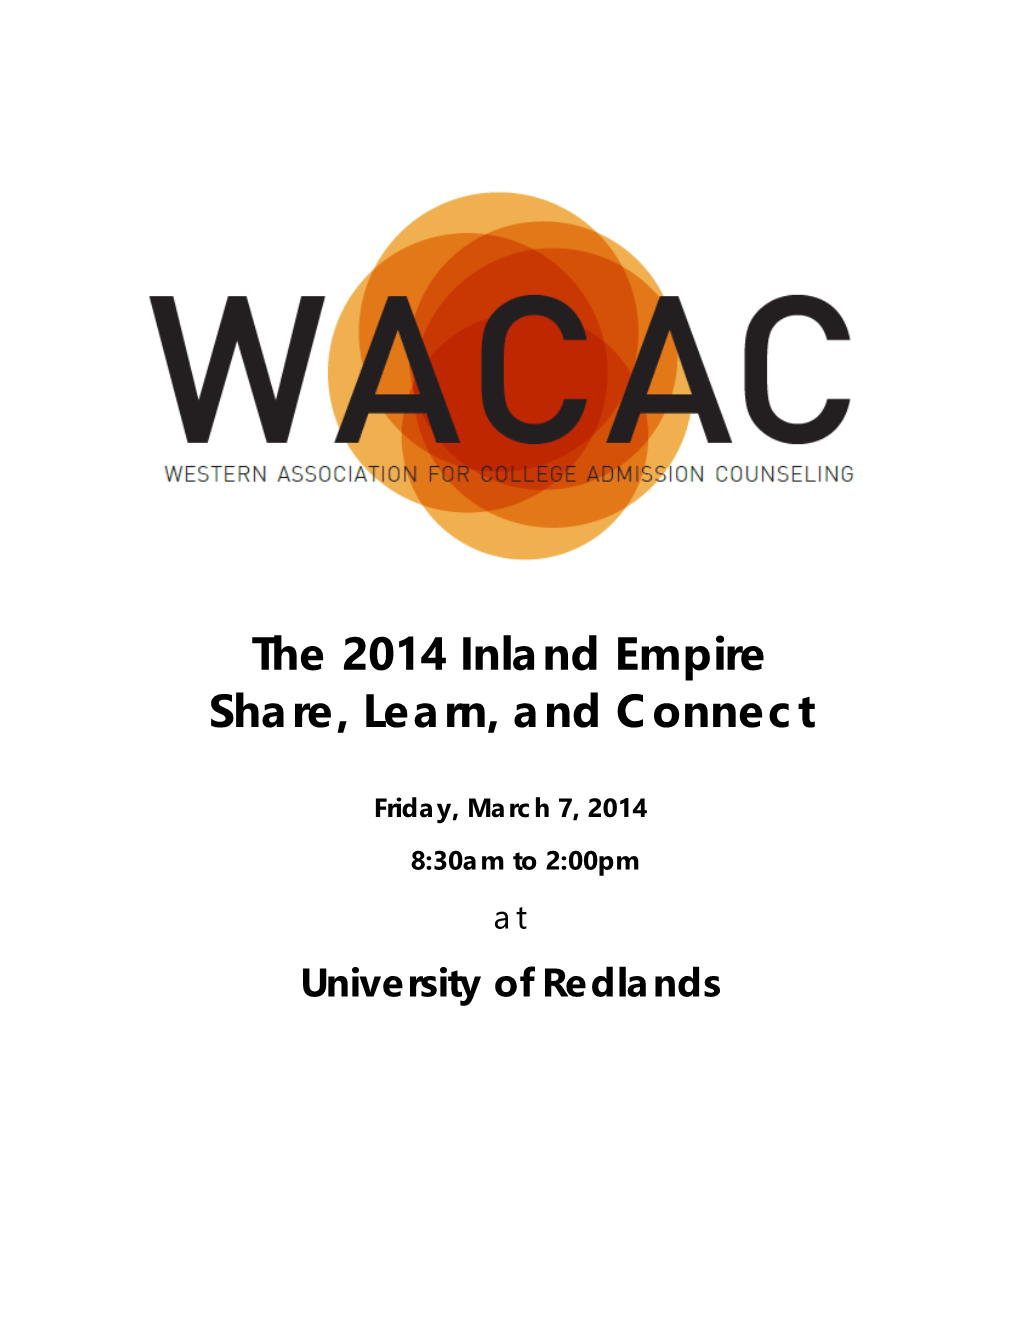 University of Redlands 2014 WACAC Share, Learn, and Connect – Inland Empire Schedule At-A-Glance